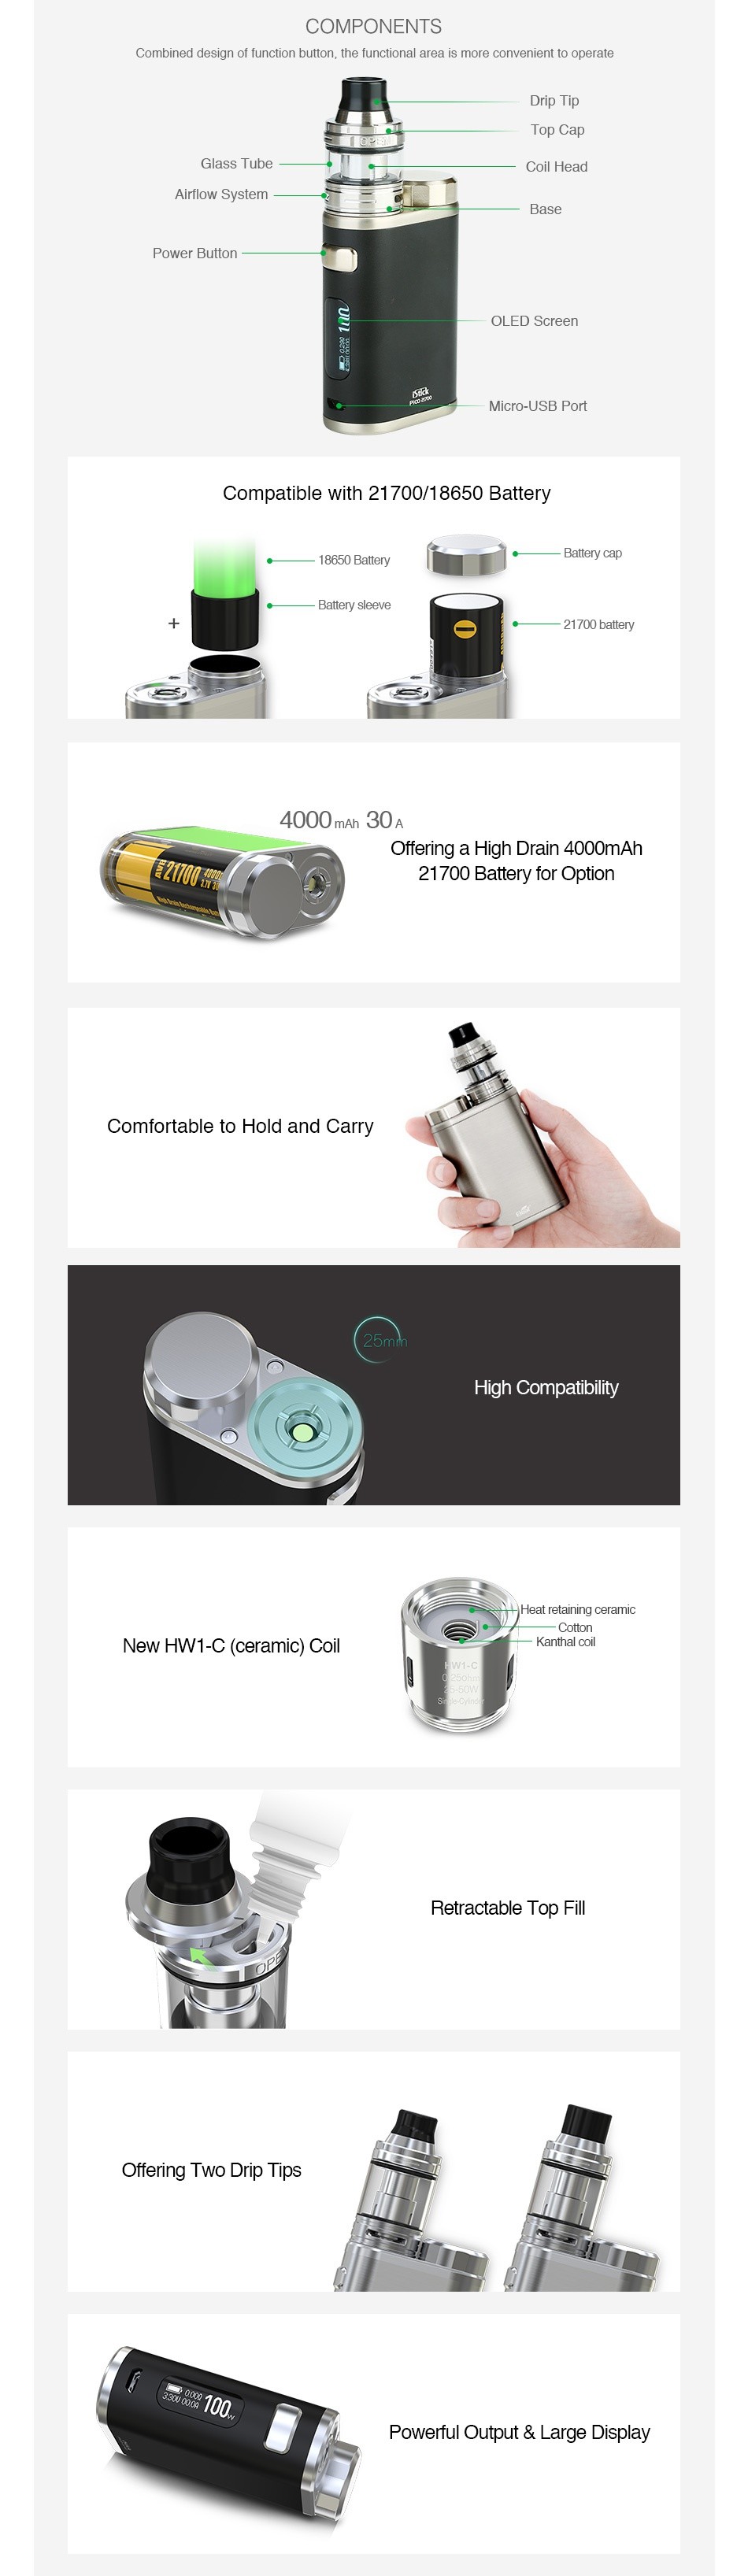 Eleaf iStick Pico 21700 100W with Ello TC Kit COMPONENTS    L   bullon Ihe lurchoHl aIH  Is rmore corRell le sihlHlH Top Cap Glass Tubo Coil Hesd How systern OLED SCrC Micro USB Port Compatible with 21700 18650 Battery Bacry sovc   4000mh30A Ofenng a High Drain 4o0omAh 21700 Battery for Optic Comfortable to Hold and carry High Compatibility HEat retaining ceramic New HW1 C ceramic Coil p Offering Two Drip Tips Powerful Output Large Display